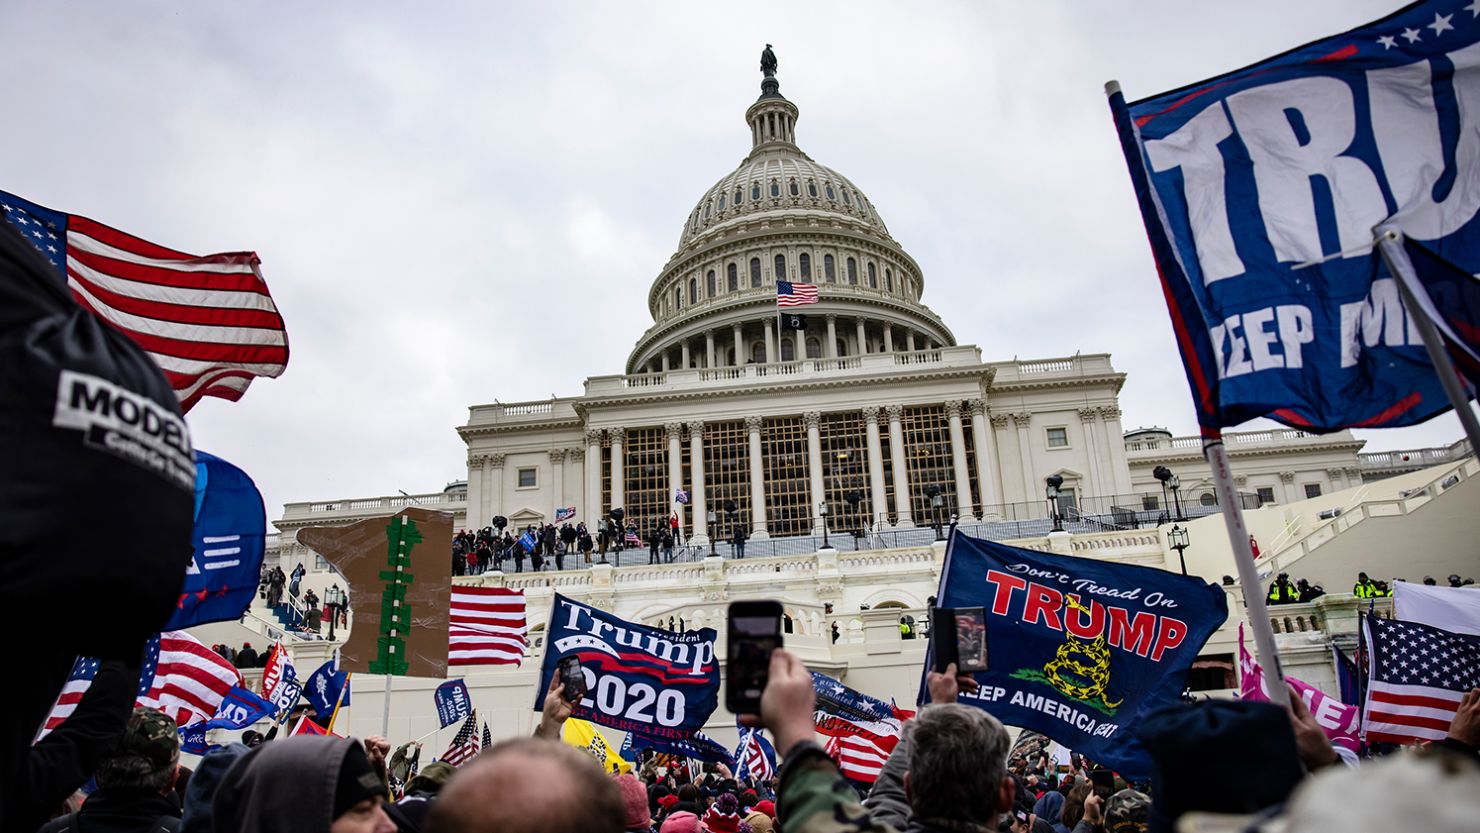 Pro-Trump supporters storm the US Capitol following a rally with then-President Donald Trump on January 6, 2021 in Washington, DC.